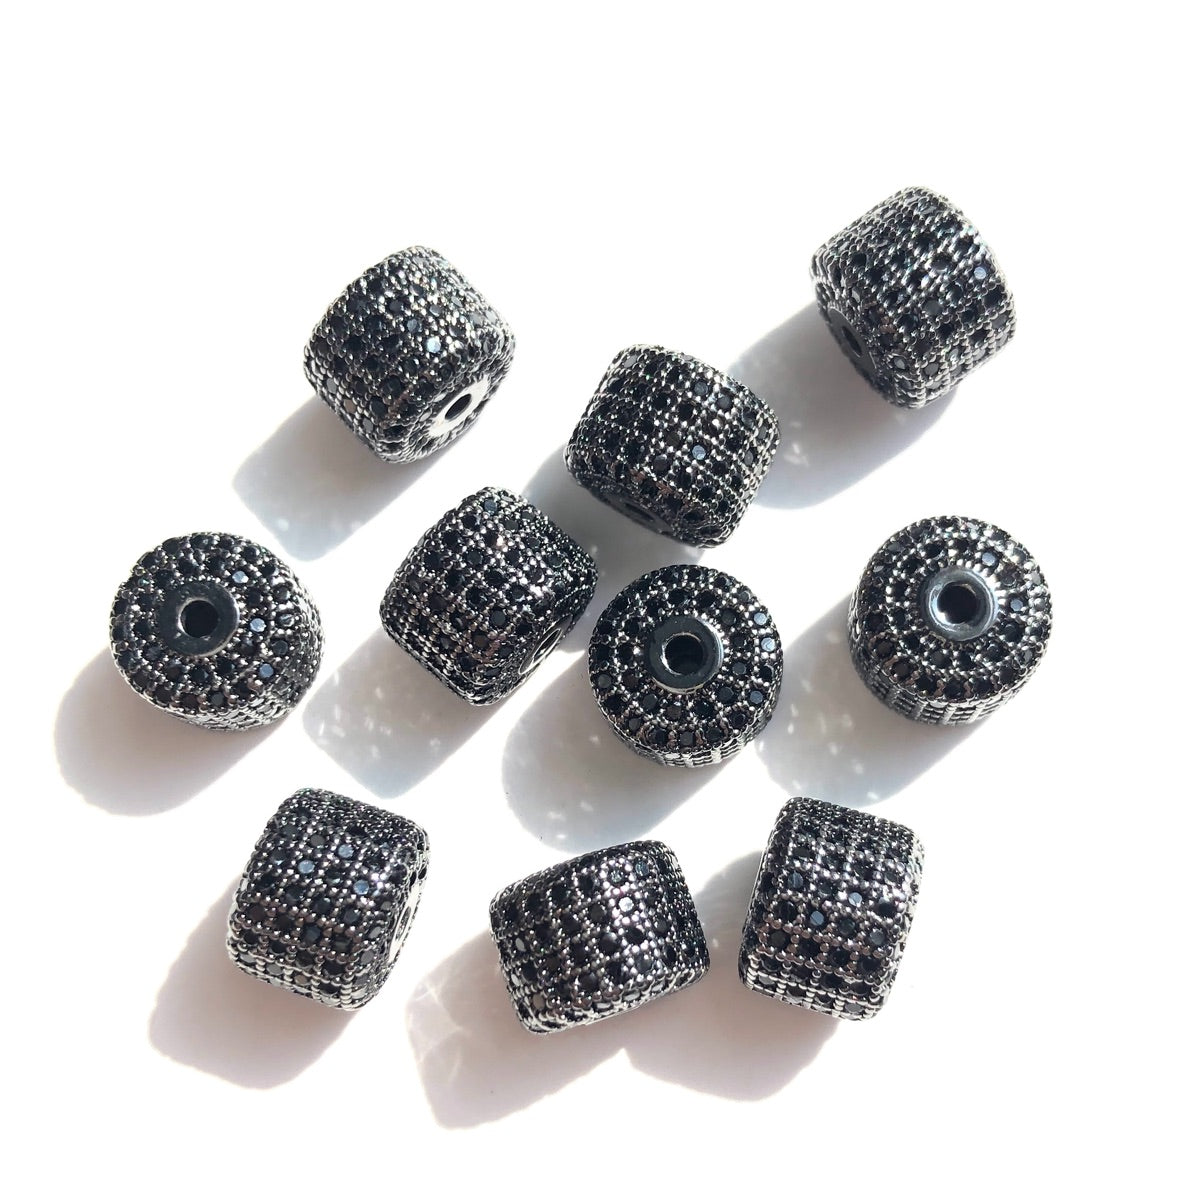 10-20pcs/lot 9.6*7.4mm CZ Paved Wheel Spacers Black on Black CZ Paved Spacers New Spacers Arrivals Rondelle Beads Charms Beads Beyond